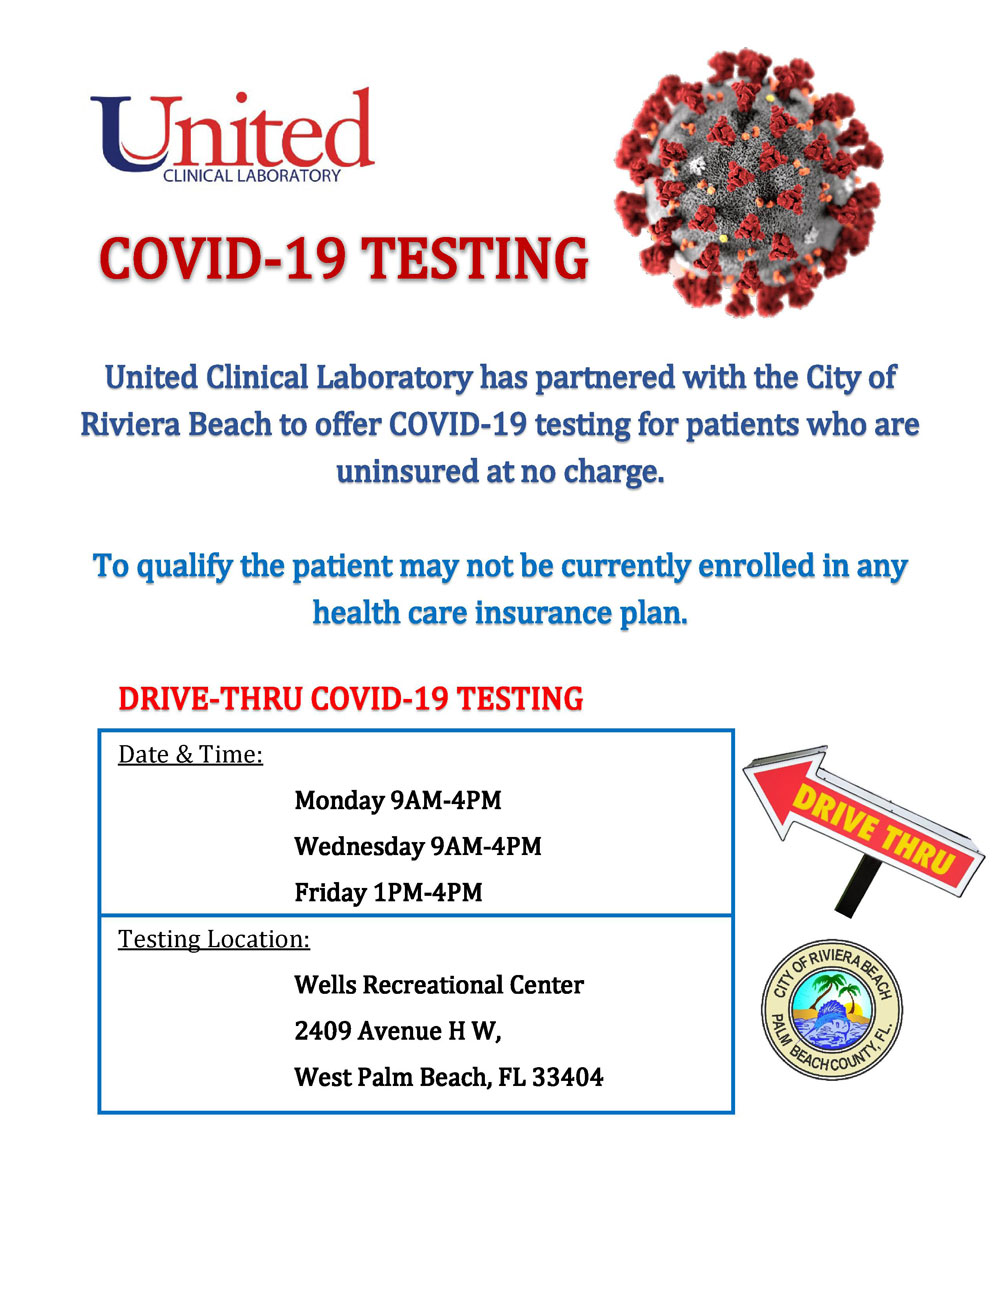 Beginning today through the end of December, City residents can get free COVID-19 testing--without having health insurance! That's thanks to the City's partnership with West Palm Beach-based United Clinical Laboratory, which ensures that anyone who needs testing can get it. Indeed, the rapid-speed testing is available to all Palm Beach County residents, three days per week, at our super-helpful City site, Wells Recreation Center across from City Hall. Did we say the testing is completely free? Yes. Questions? Call 561-840-0135 or send an email here.  Date/time: Monday and Wednesday, 9 a.m. to 4 p.m.  Friday, 1 to 4 p.m.   Location:  Wells Recreation Center, 2409 Avenue H, West   For information, call 561-840-0135 or send an email vgrimsley@rivierabeach.org